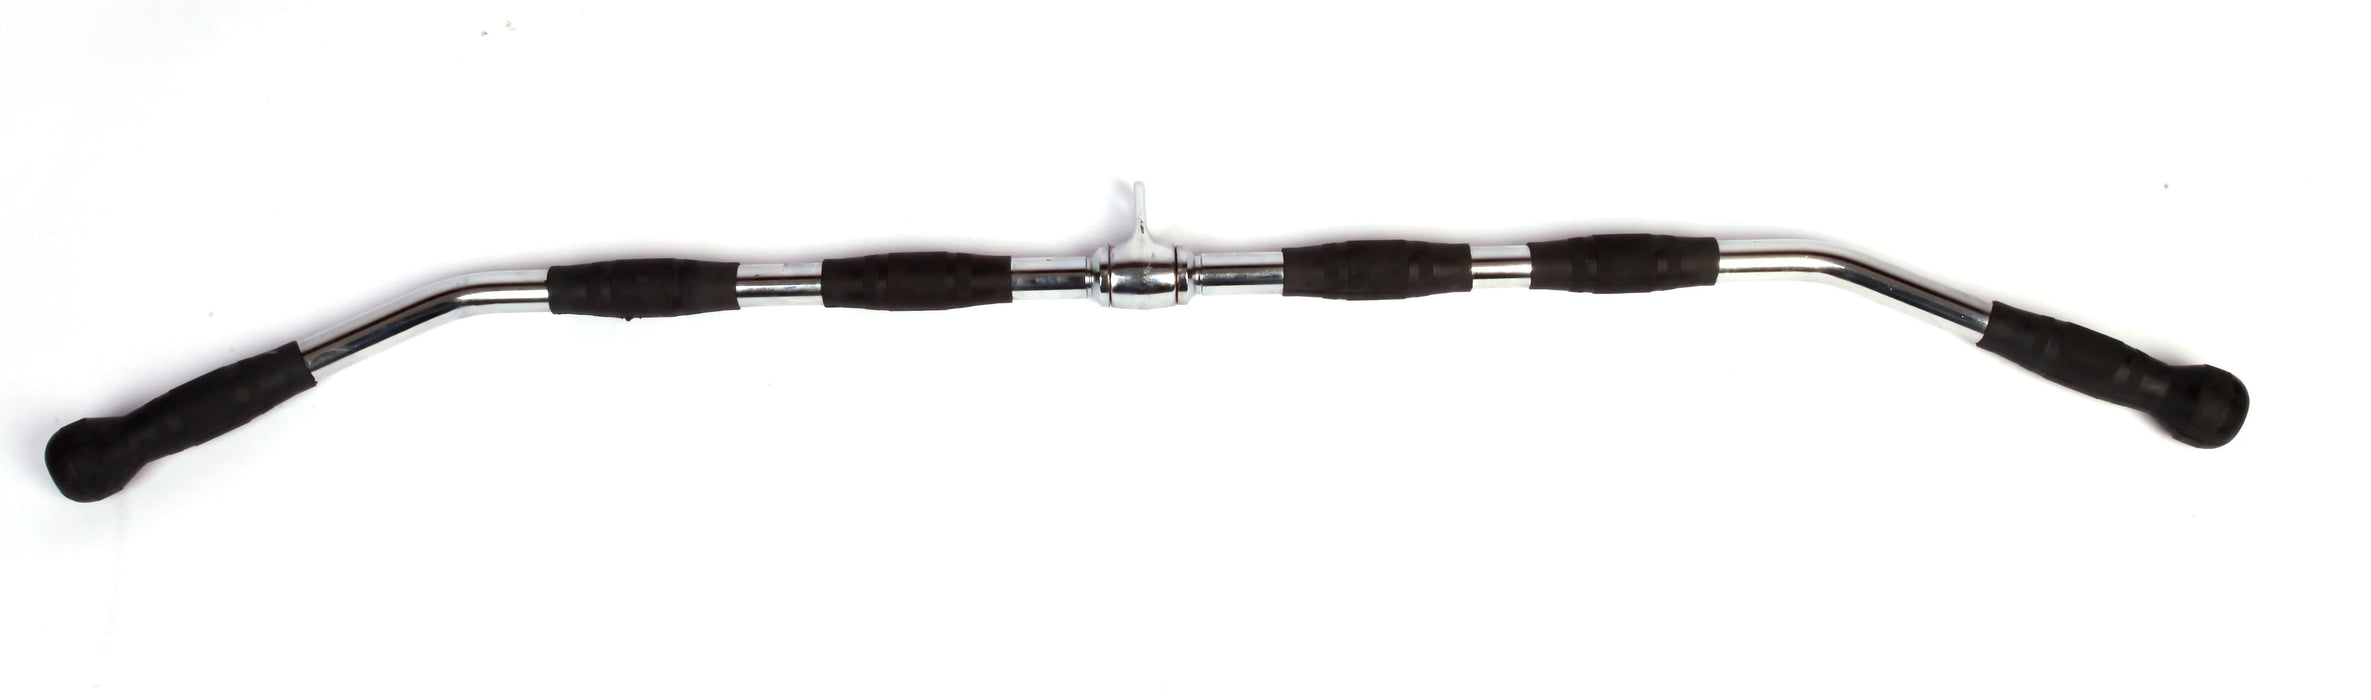 Randy & Travis Rubber-Coated Lat Pull-Down Bar Attachment $95 AUD Fitness At Home Afterpay Zip